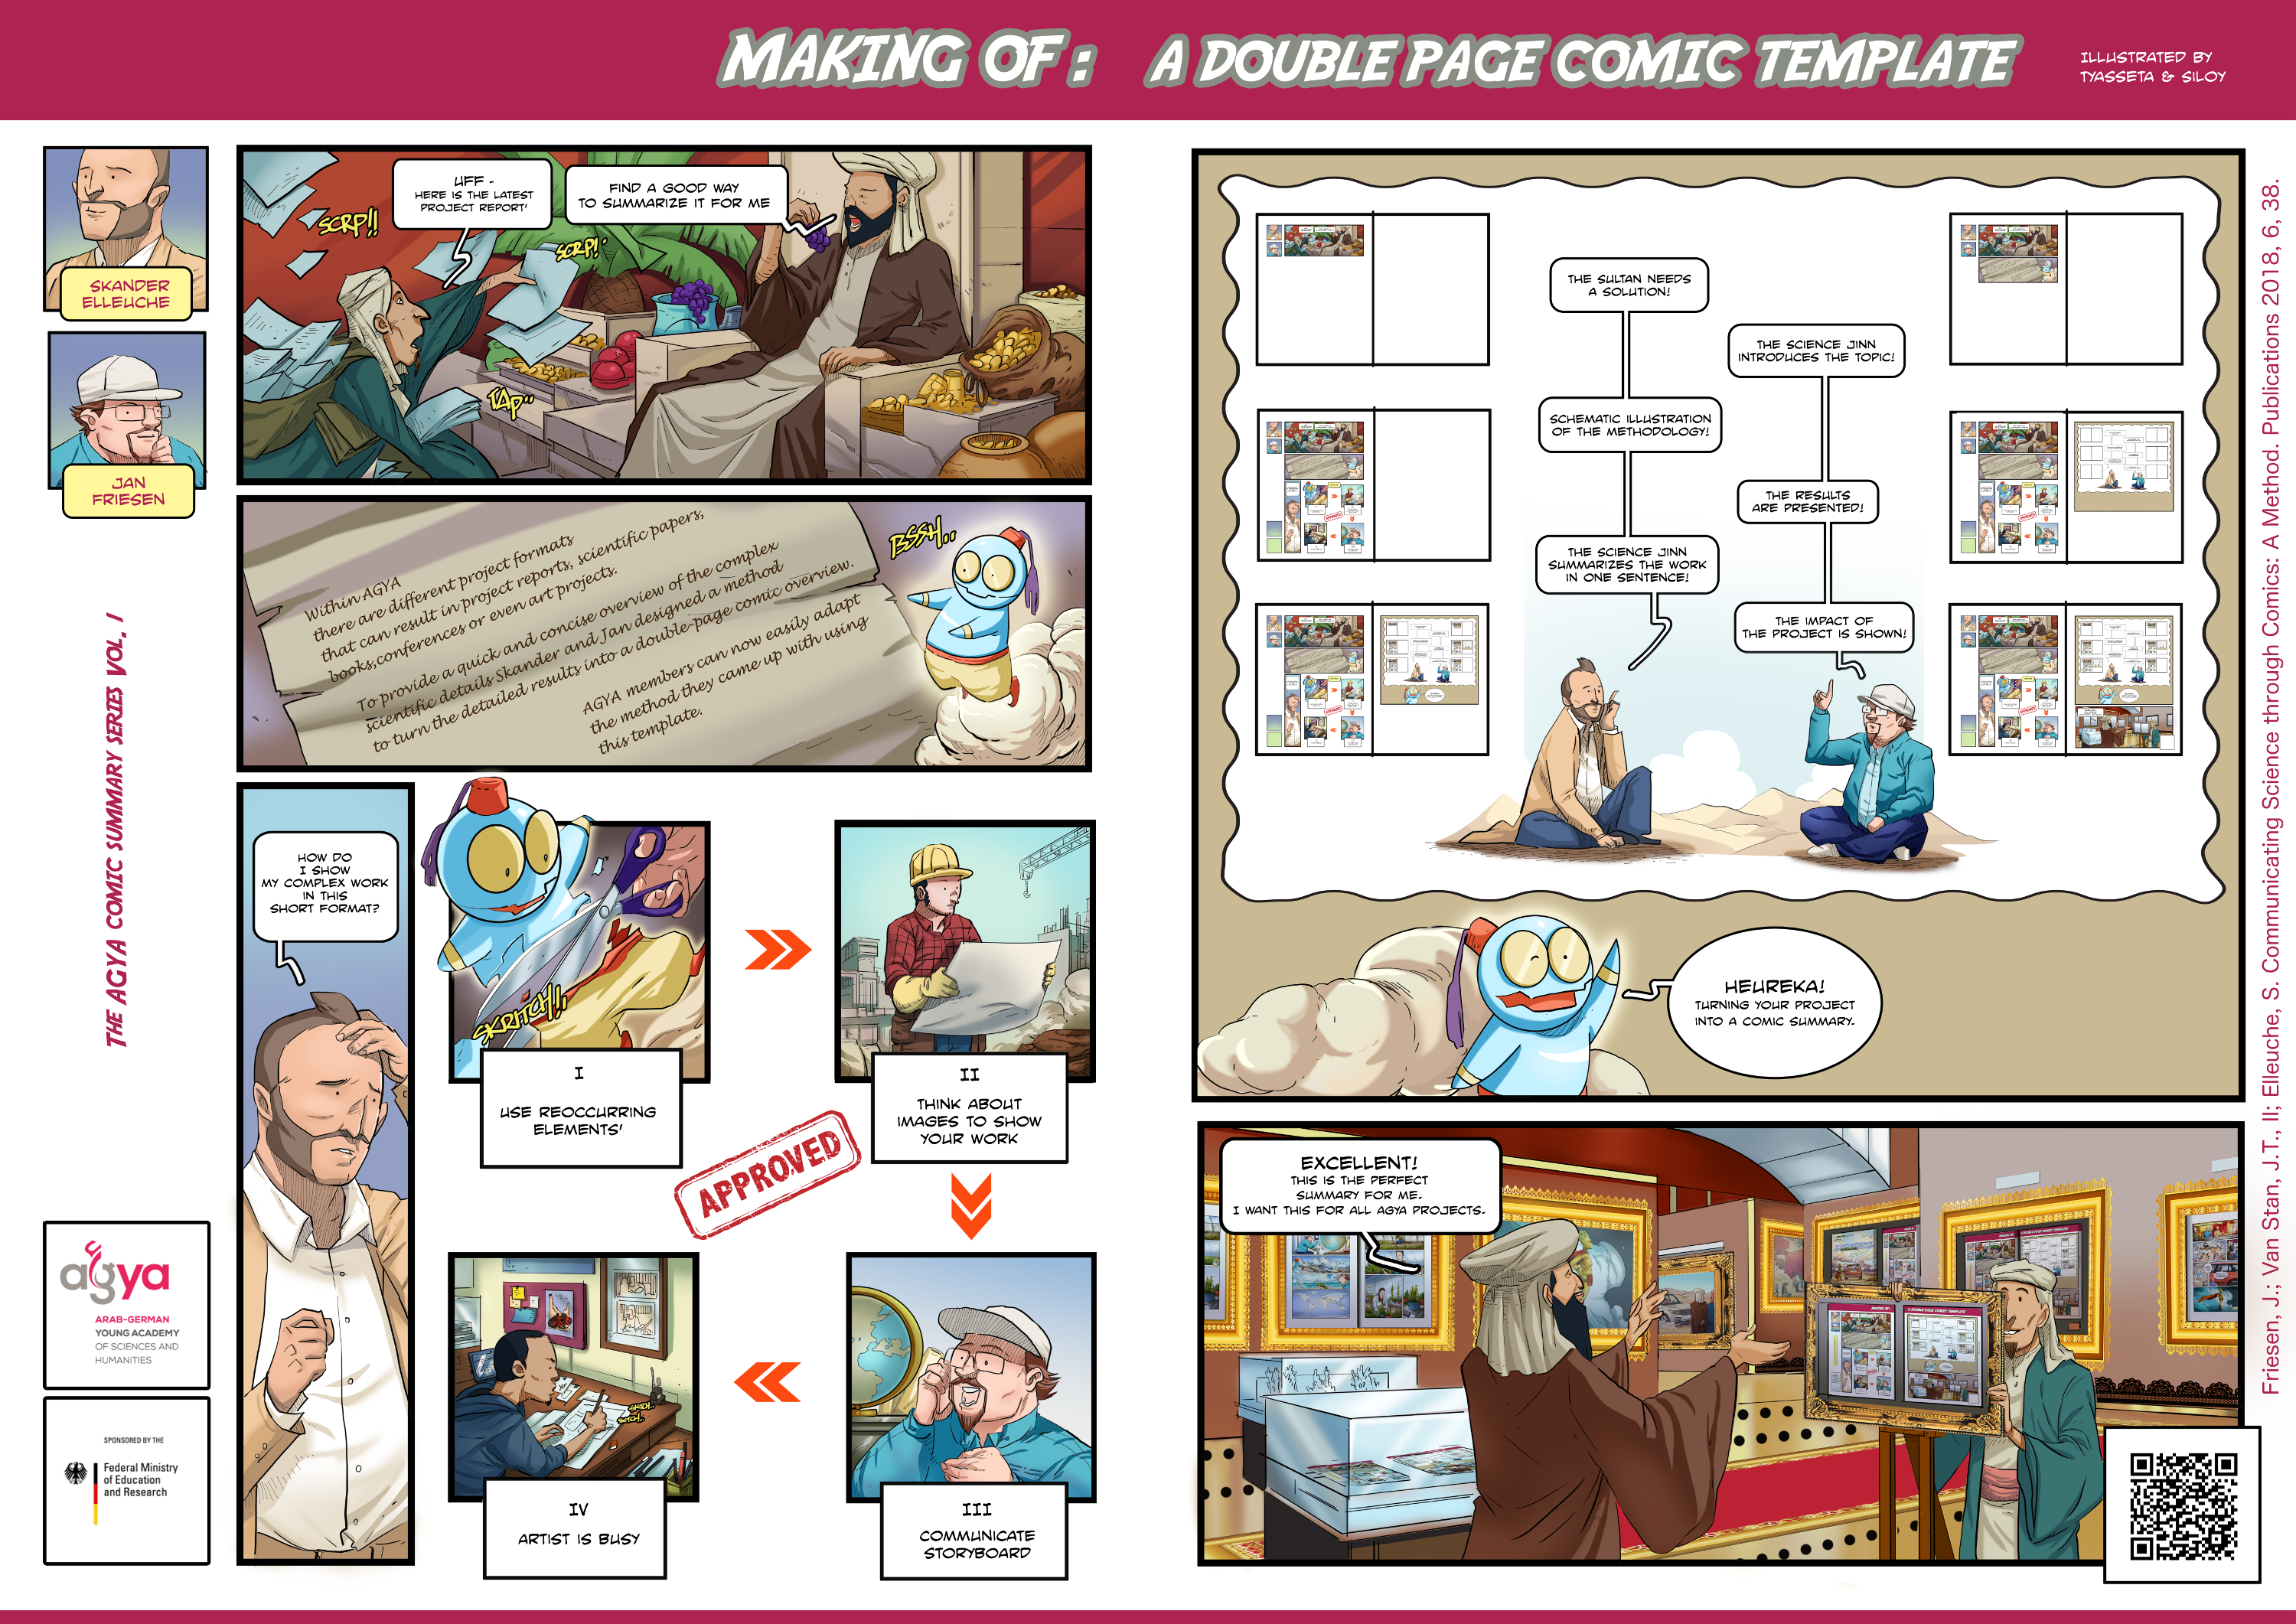 ElleucheFriesen_Making of a double page comic summary